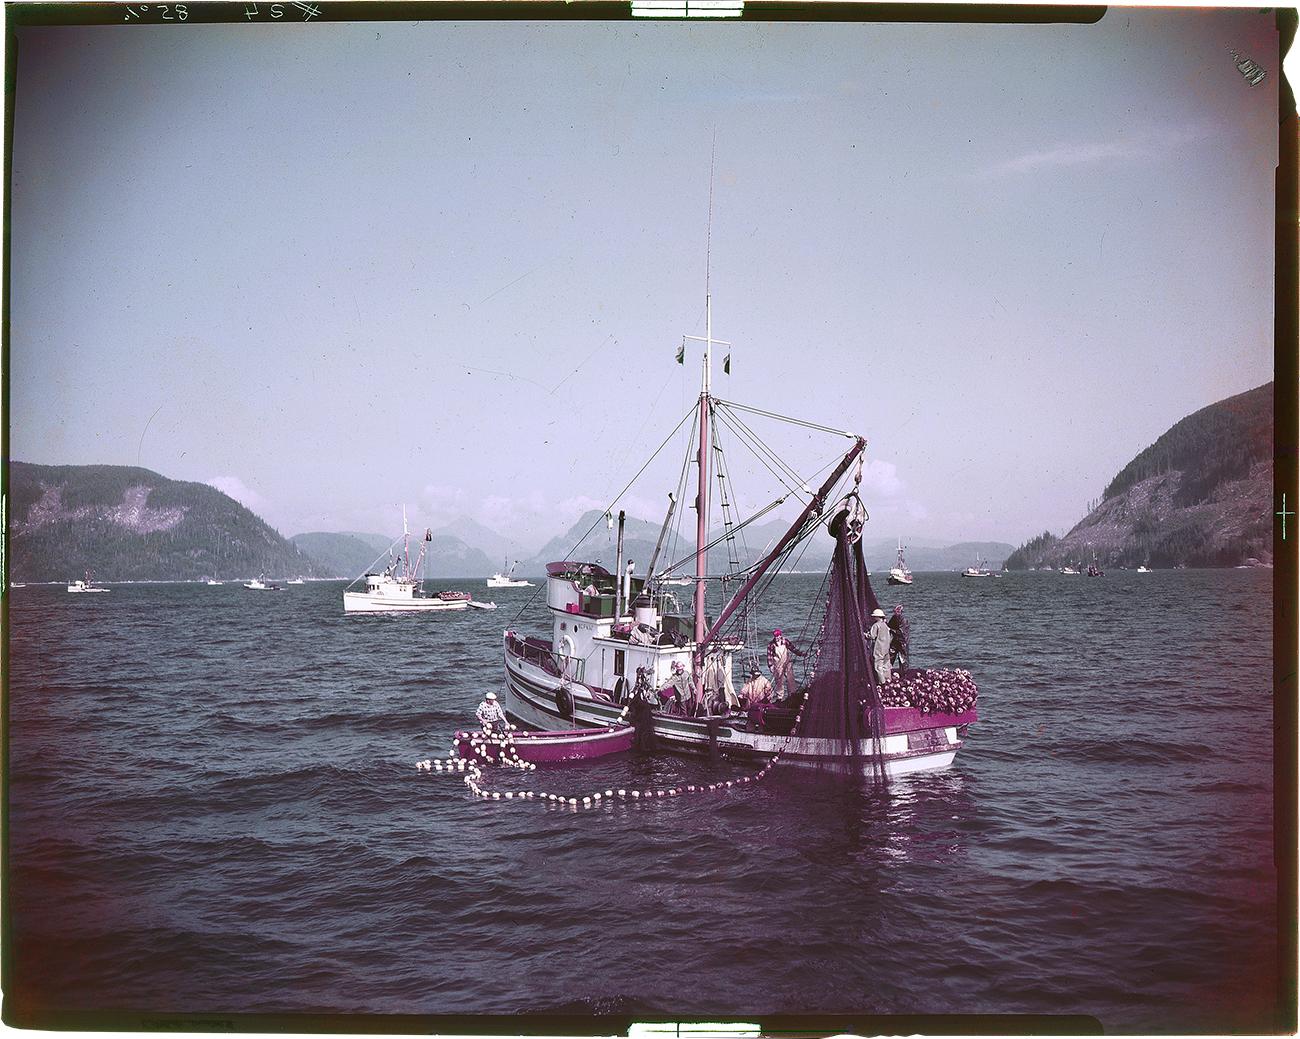 colour picture of a fishing boat on ocean near mountains